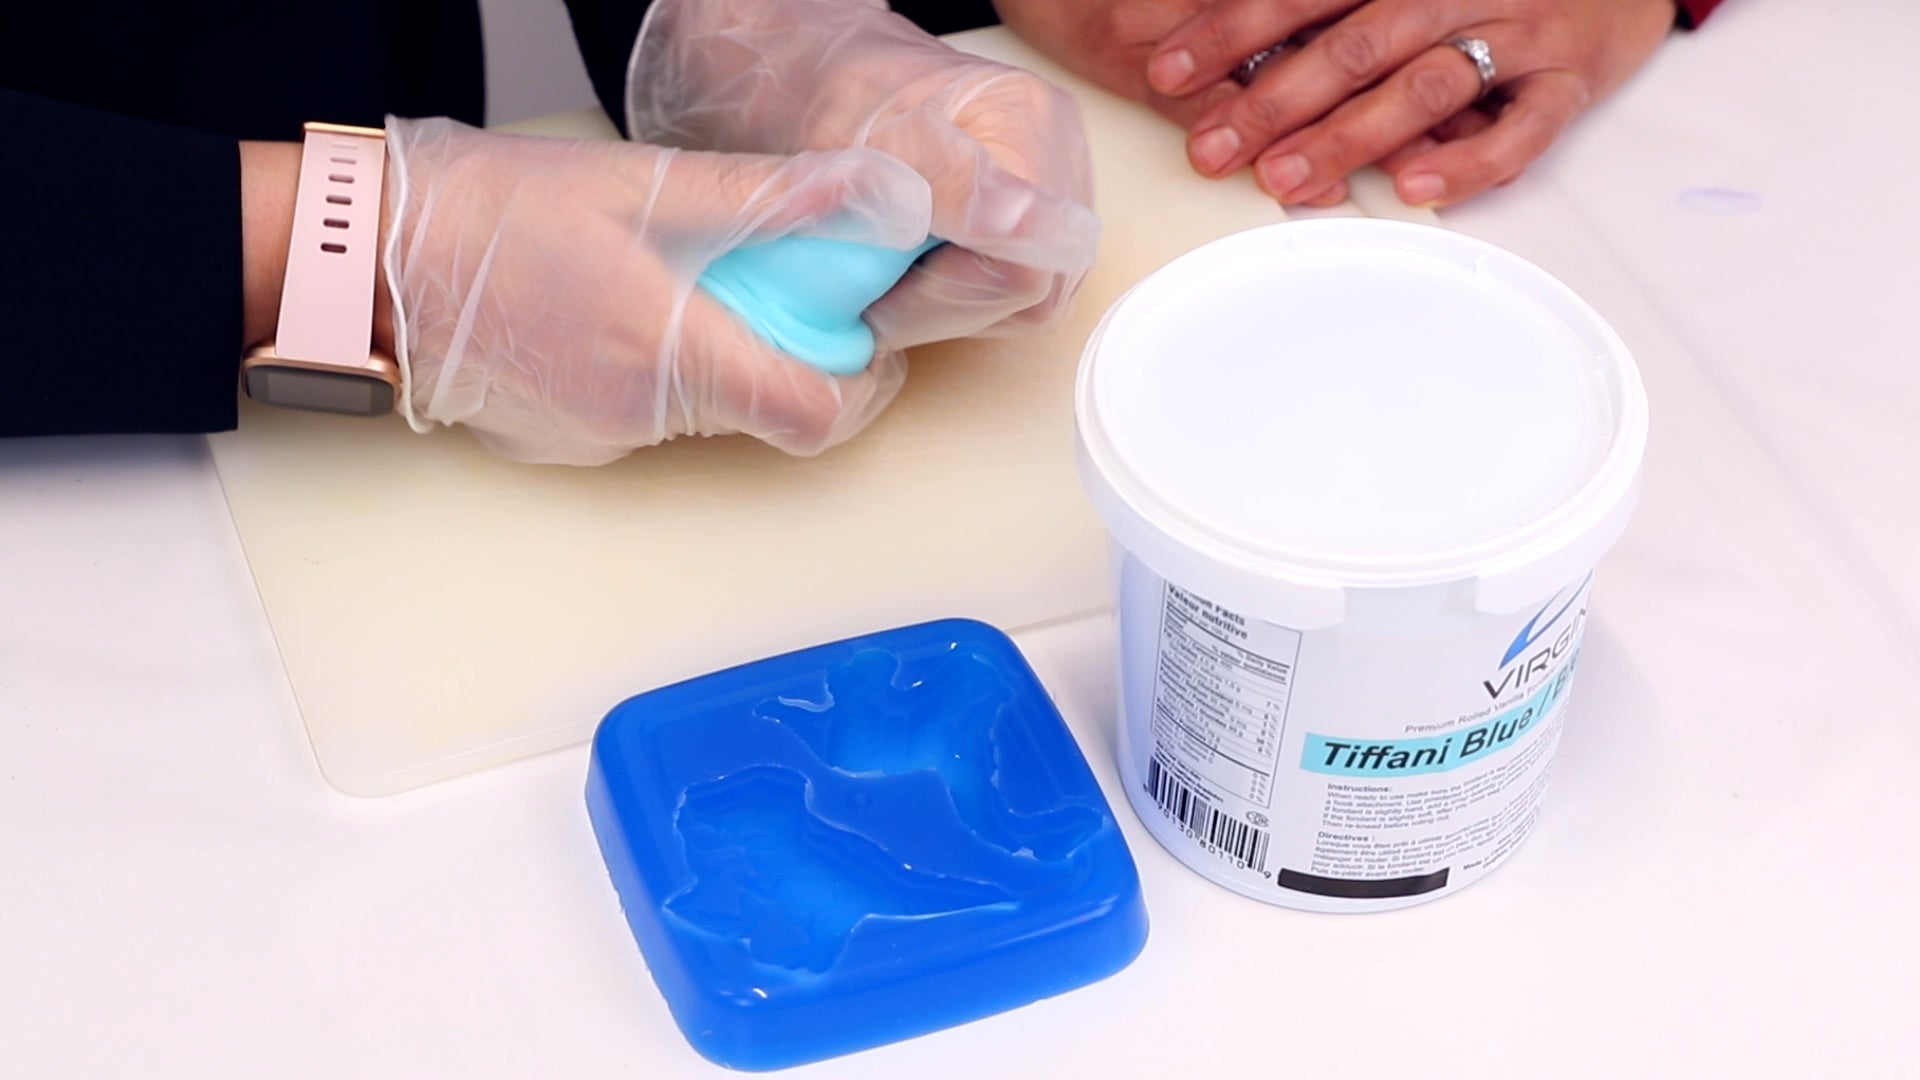 use gloved hands to knead and soften fondant